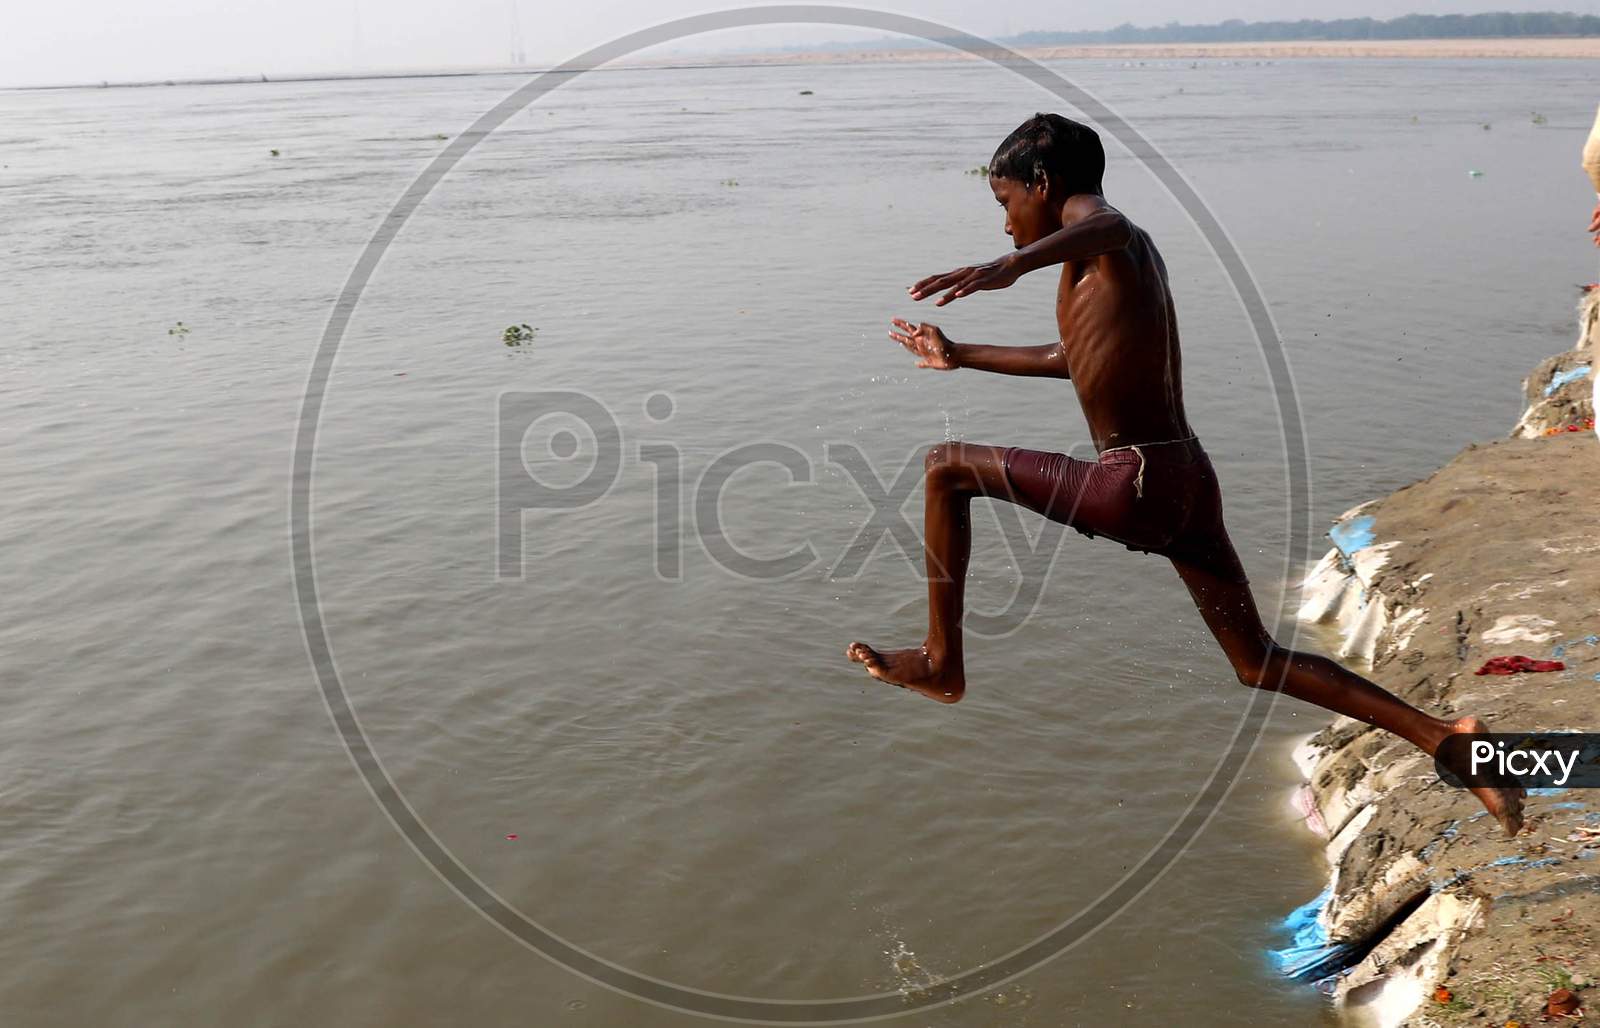 A Boy Jumps In The River Ganga To Beat The Heat On A Hot Day In Prayagraj, June 10, 2020.